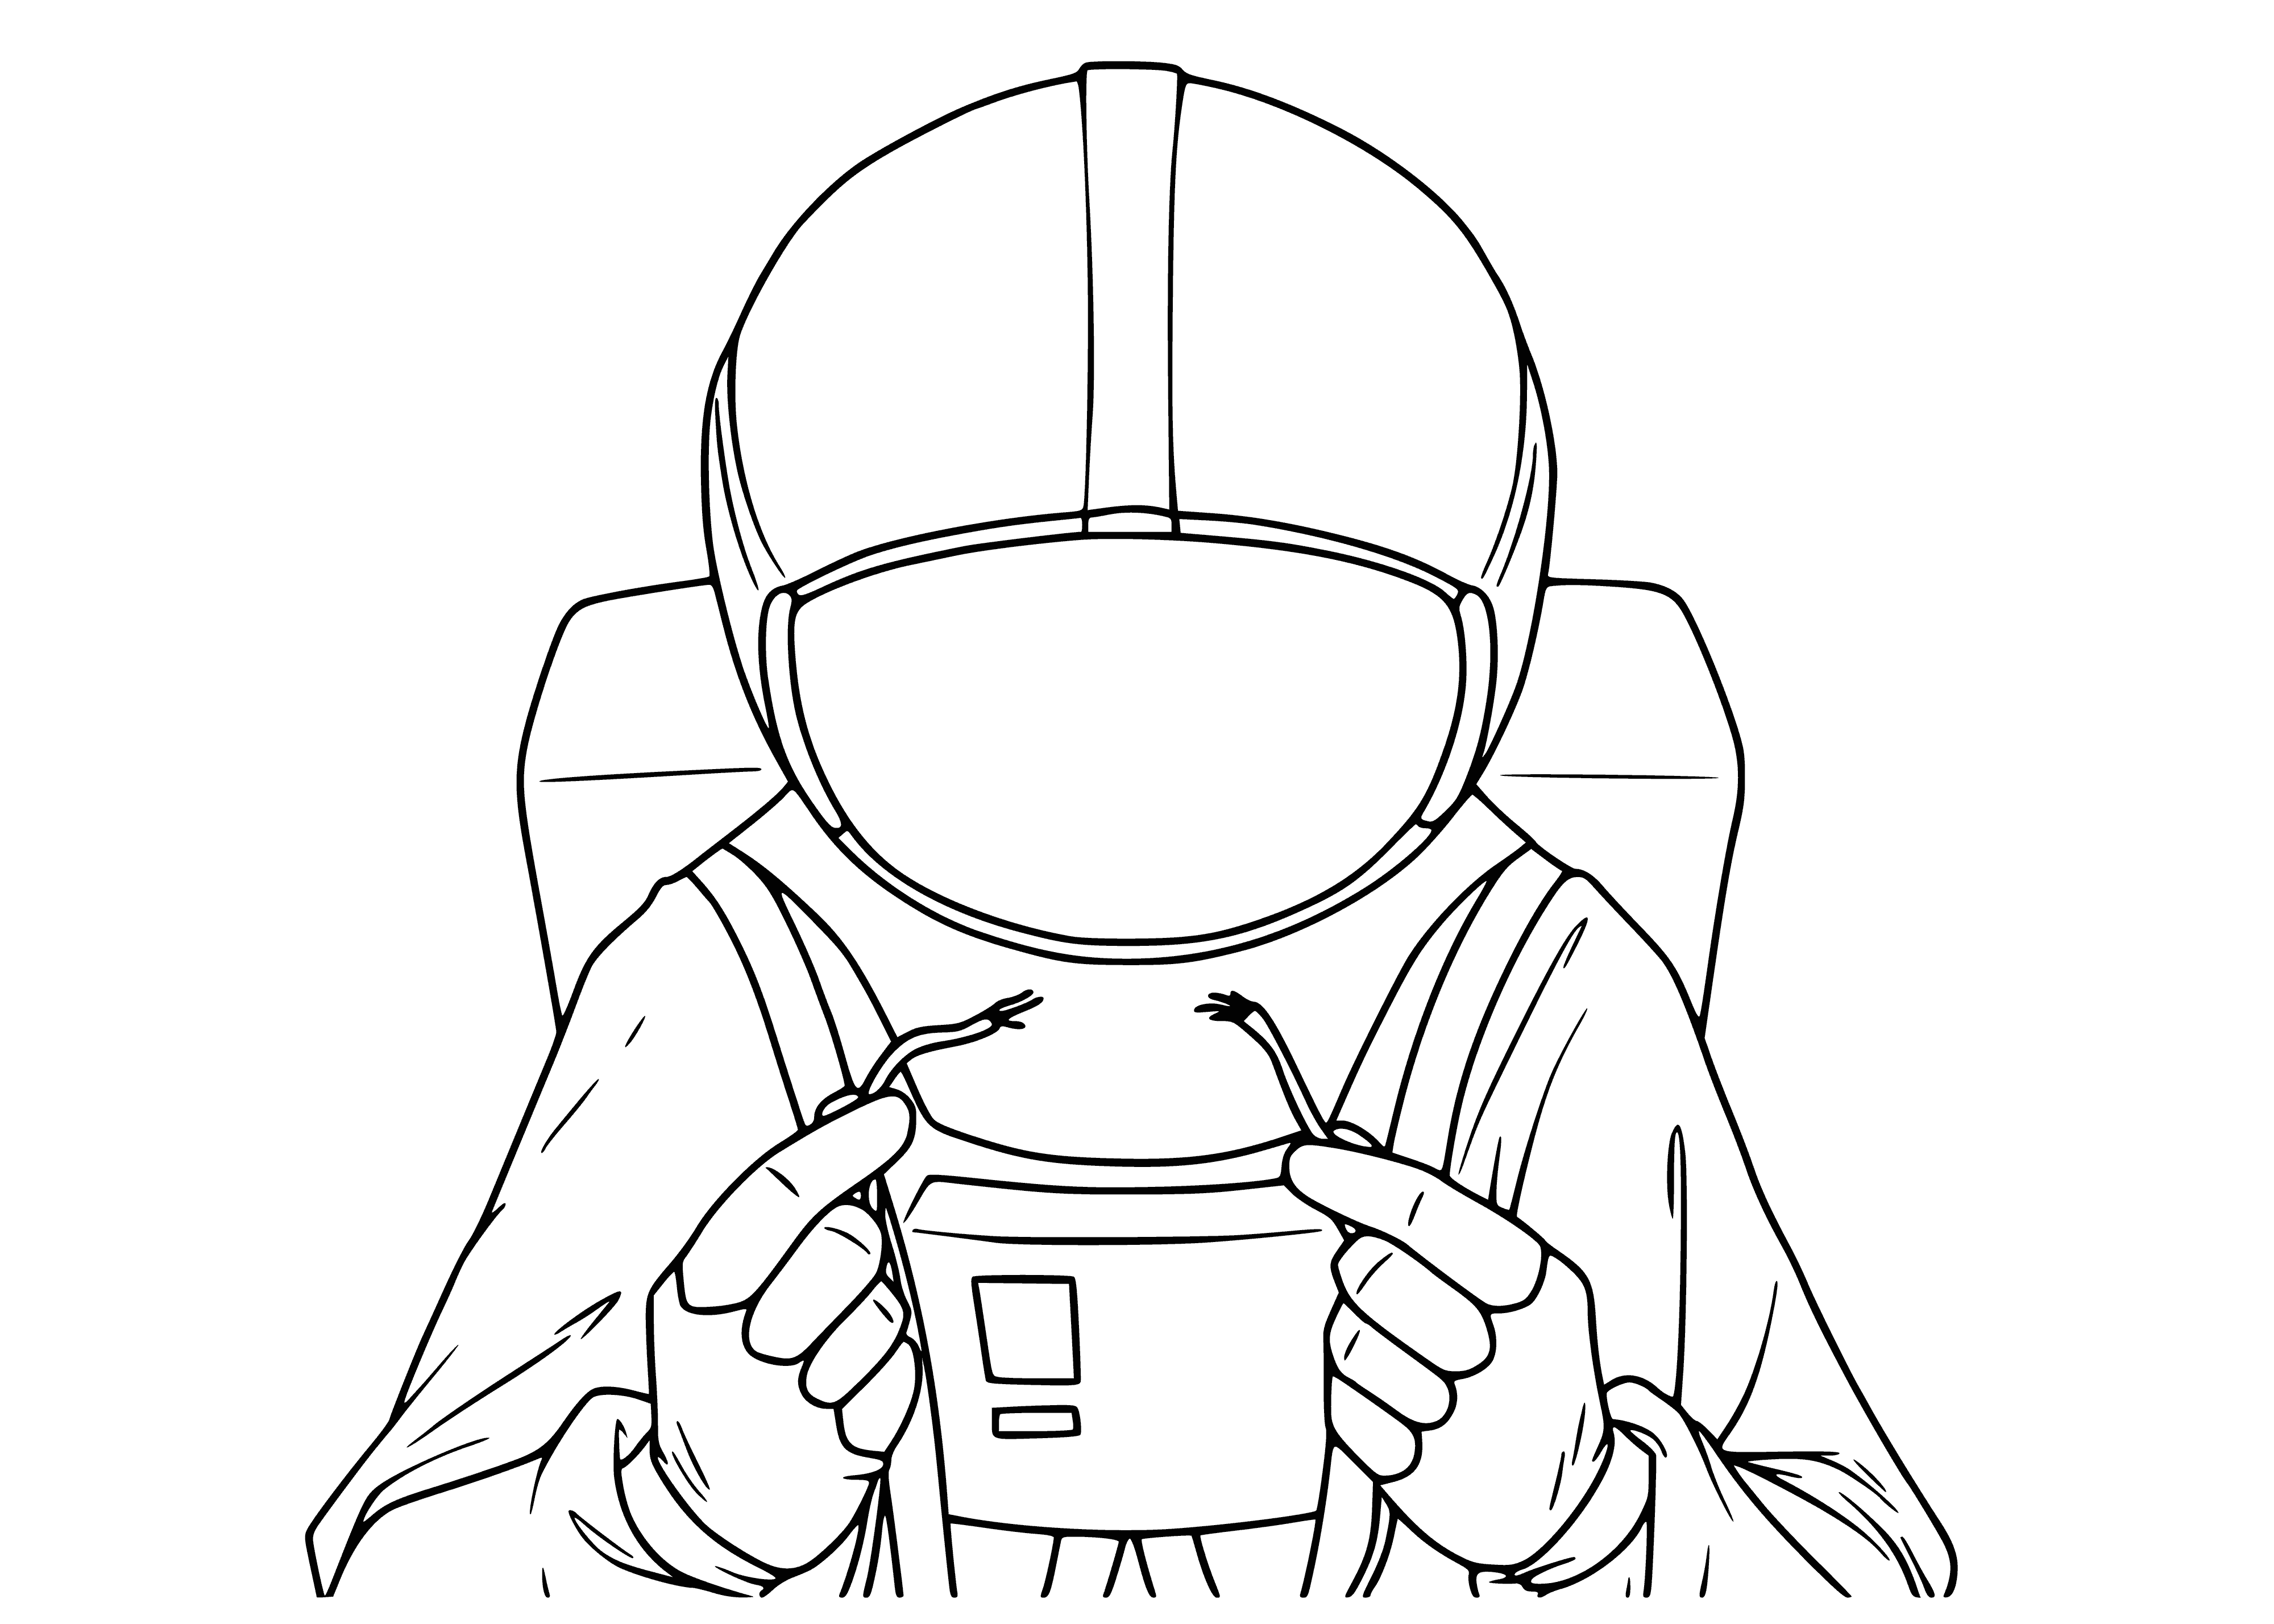 coloring page: Blonde woman in blue looking at a book in a large open room with a long table and several chairs. Two men in green and red shirts looking at her, one with a cup of coffee.